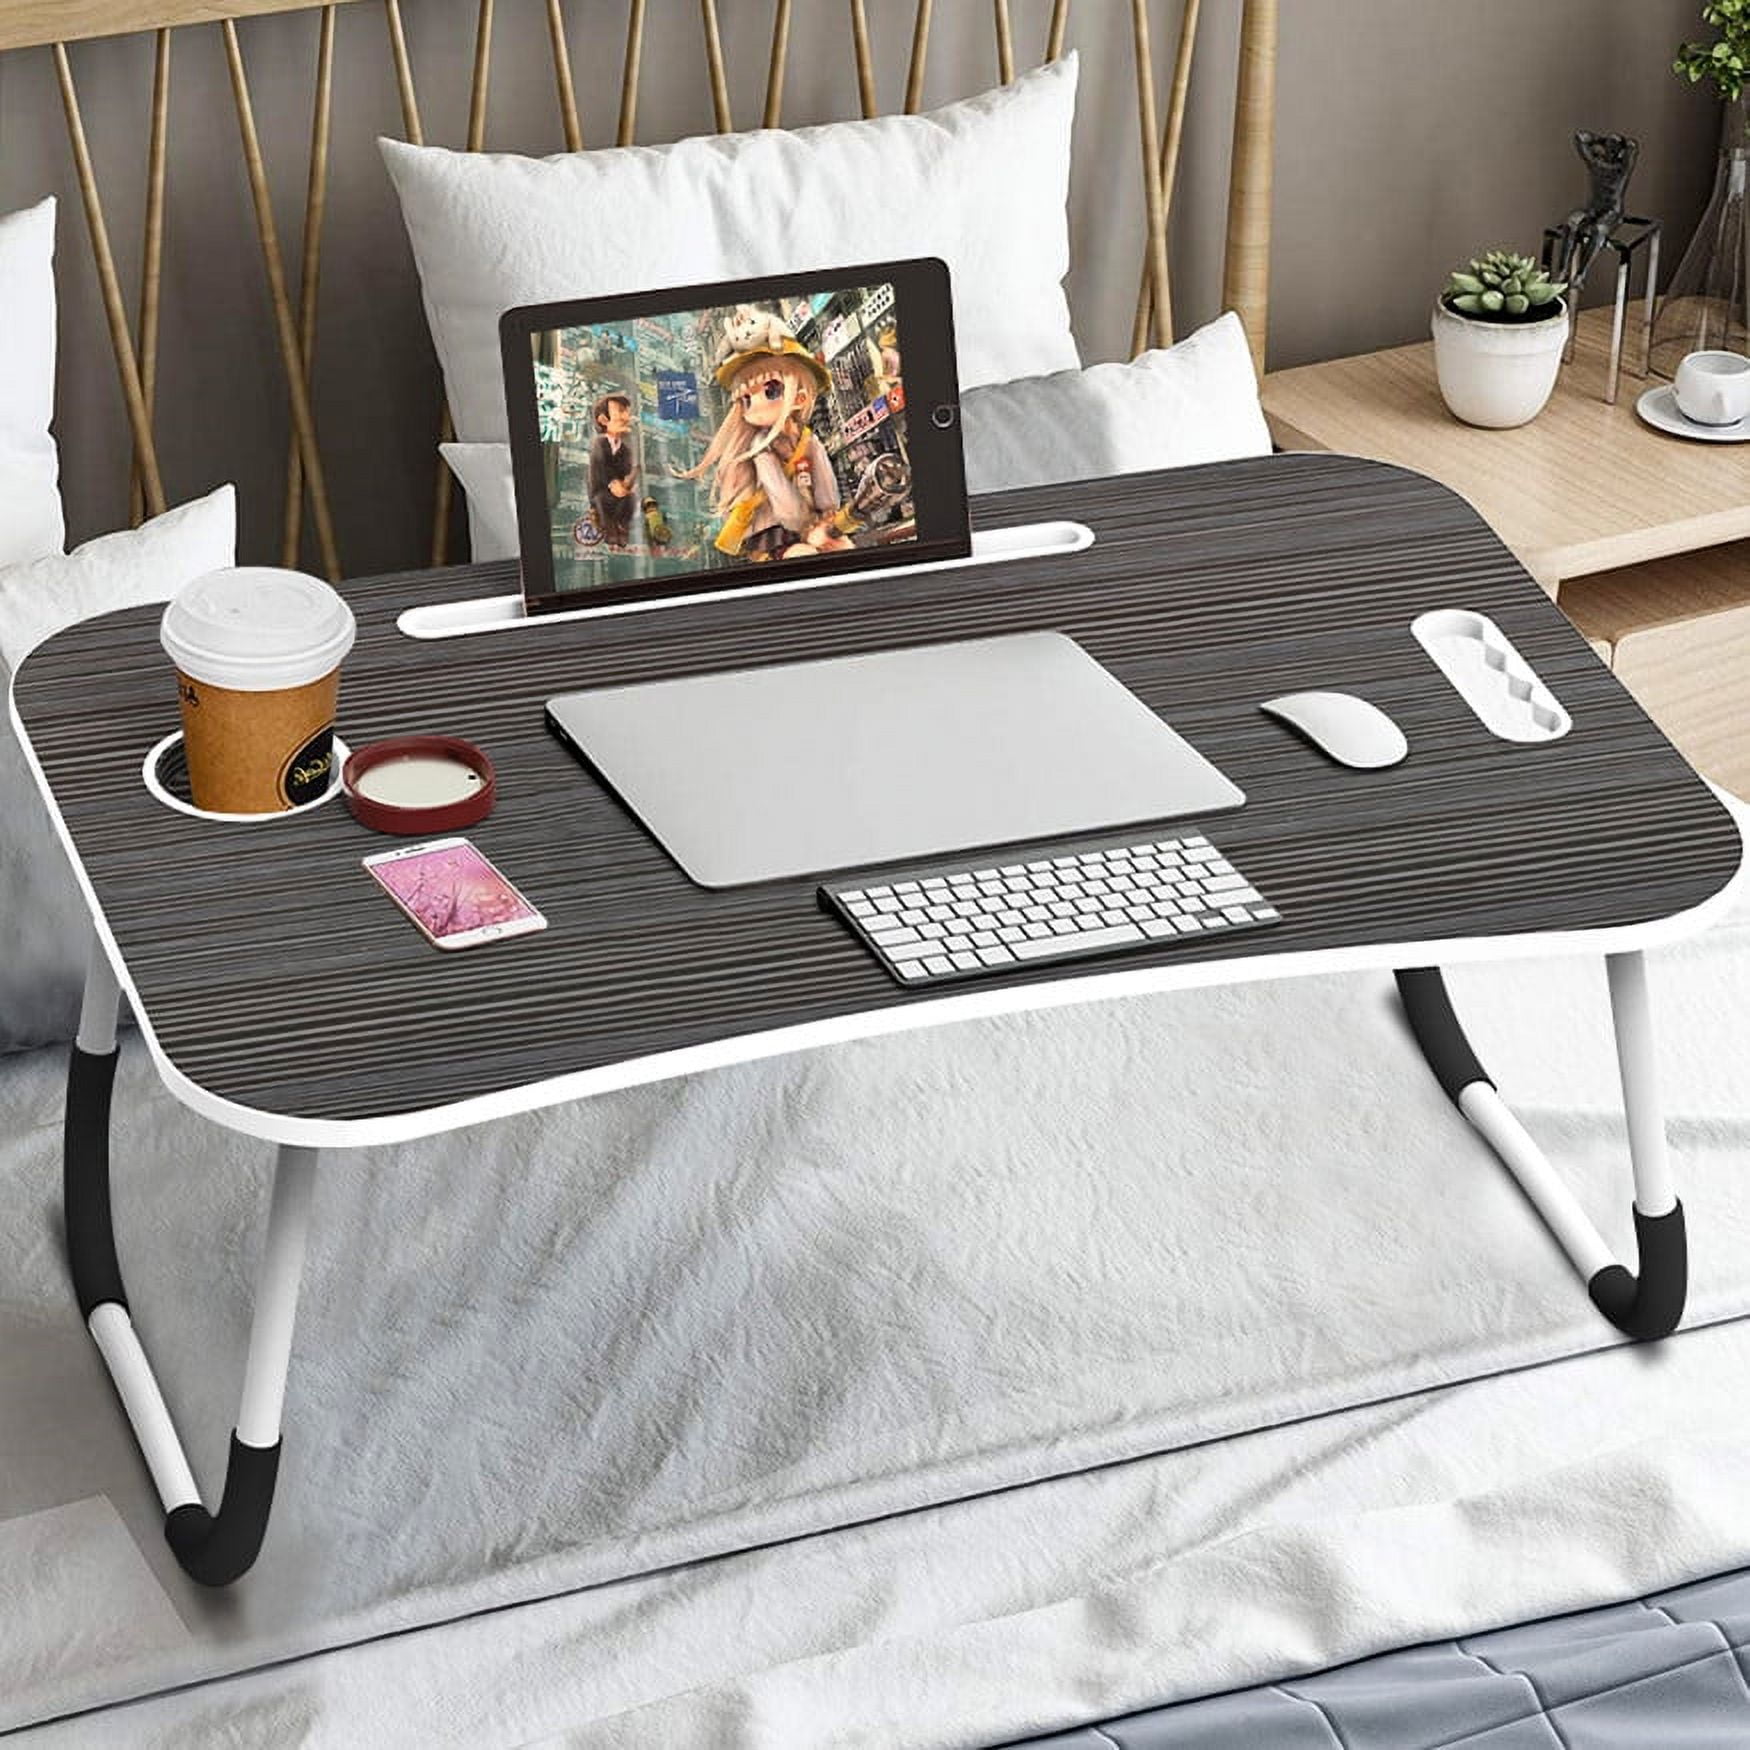 Fold Lap Desk for Kid, Portable Laptop Bed Tray with Legs, Small Lazy  Laptop Bed Table with iPad Slots, Gray Laptop Table for Adults/Students,  Eating Working Gaming Desk for Couch/Sofa/Floor, HJ1855 